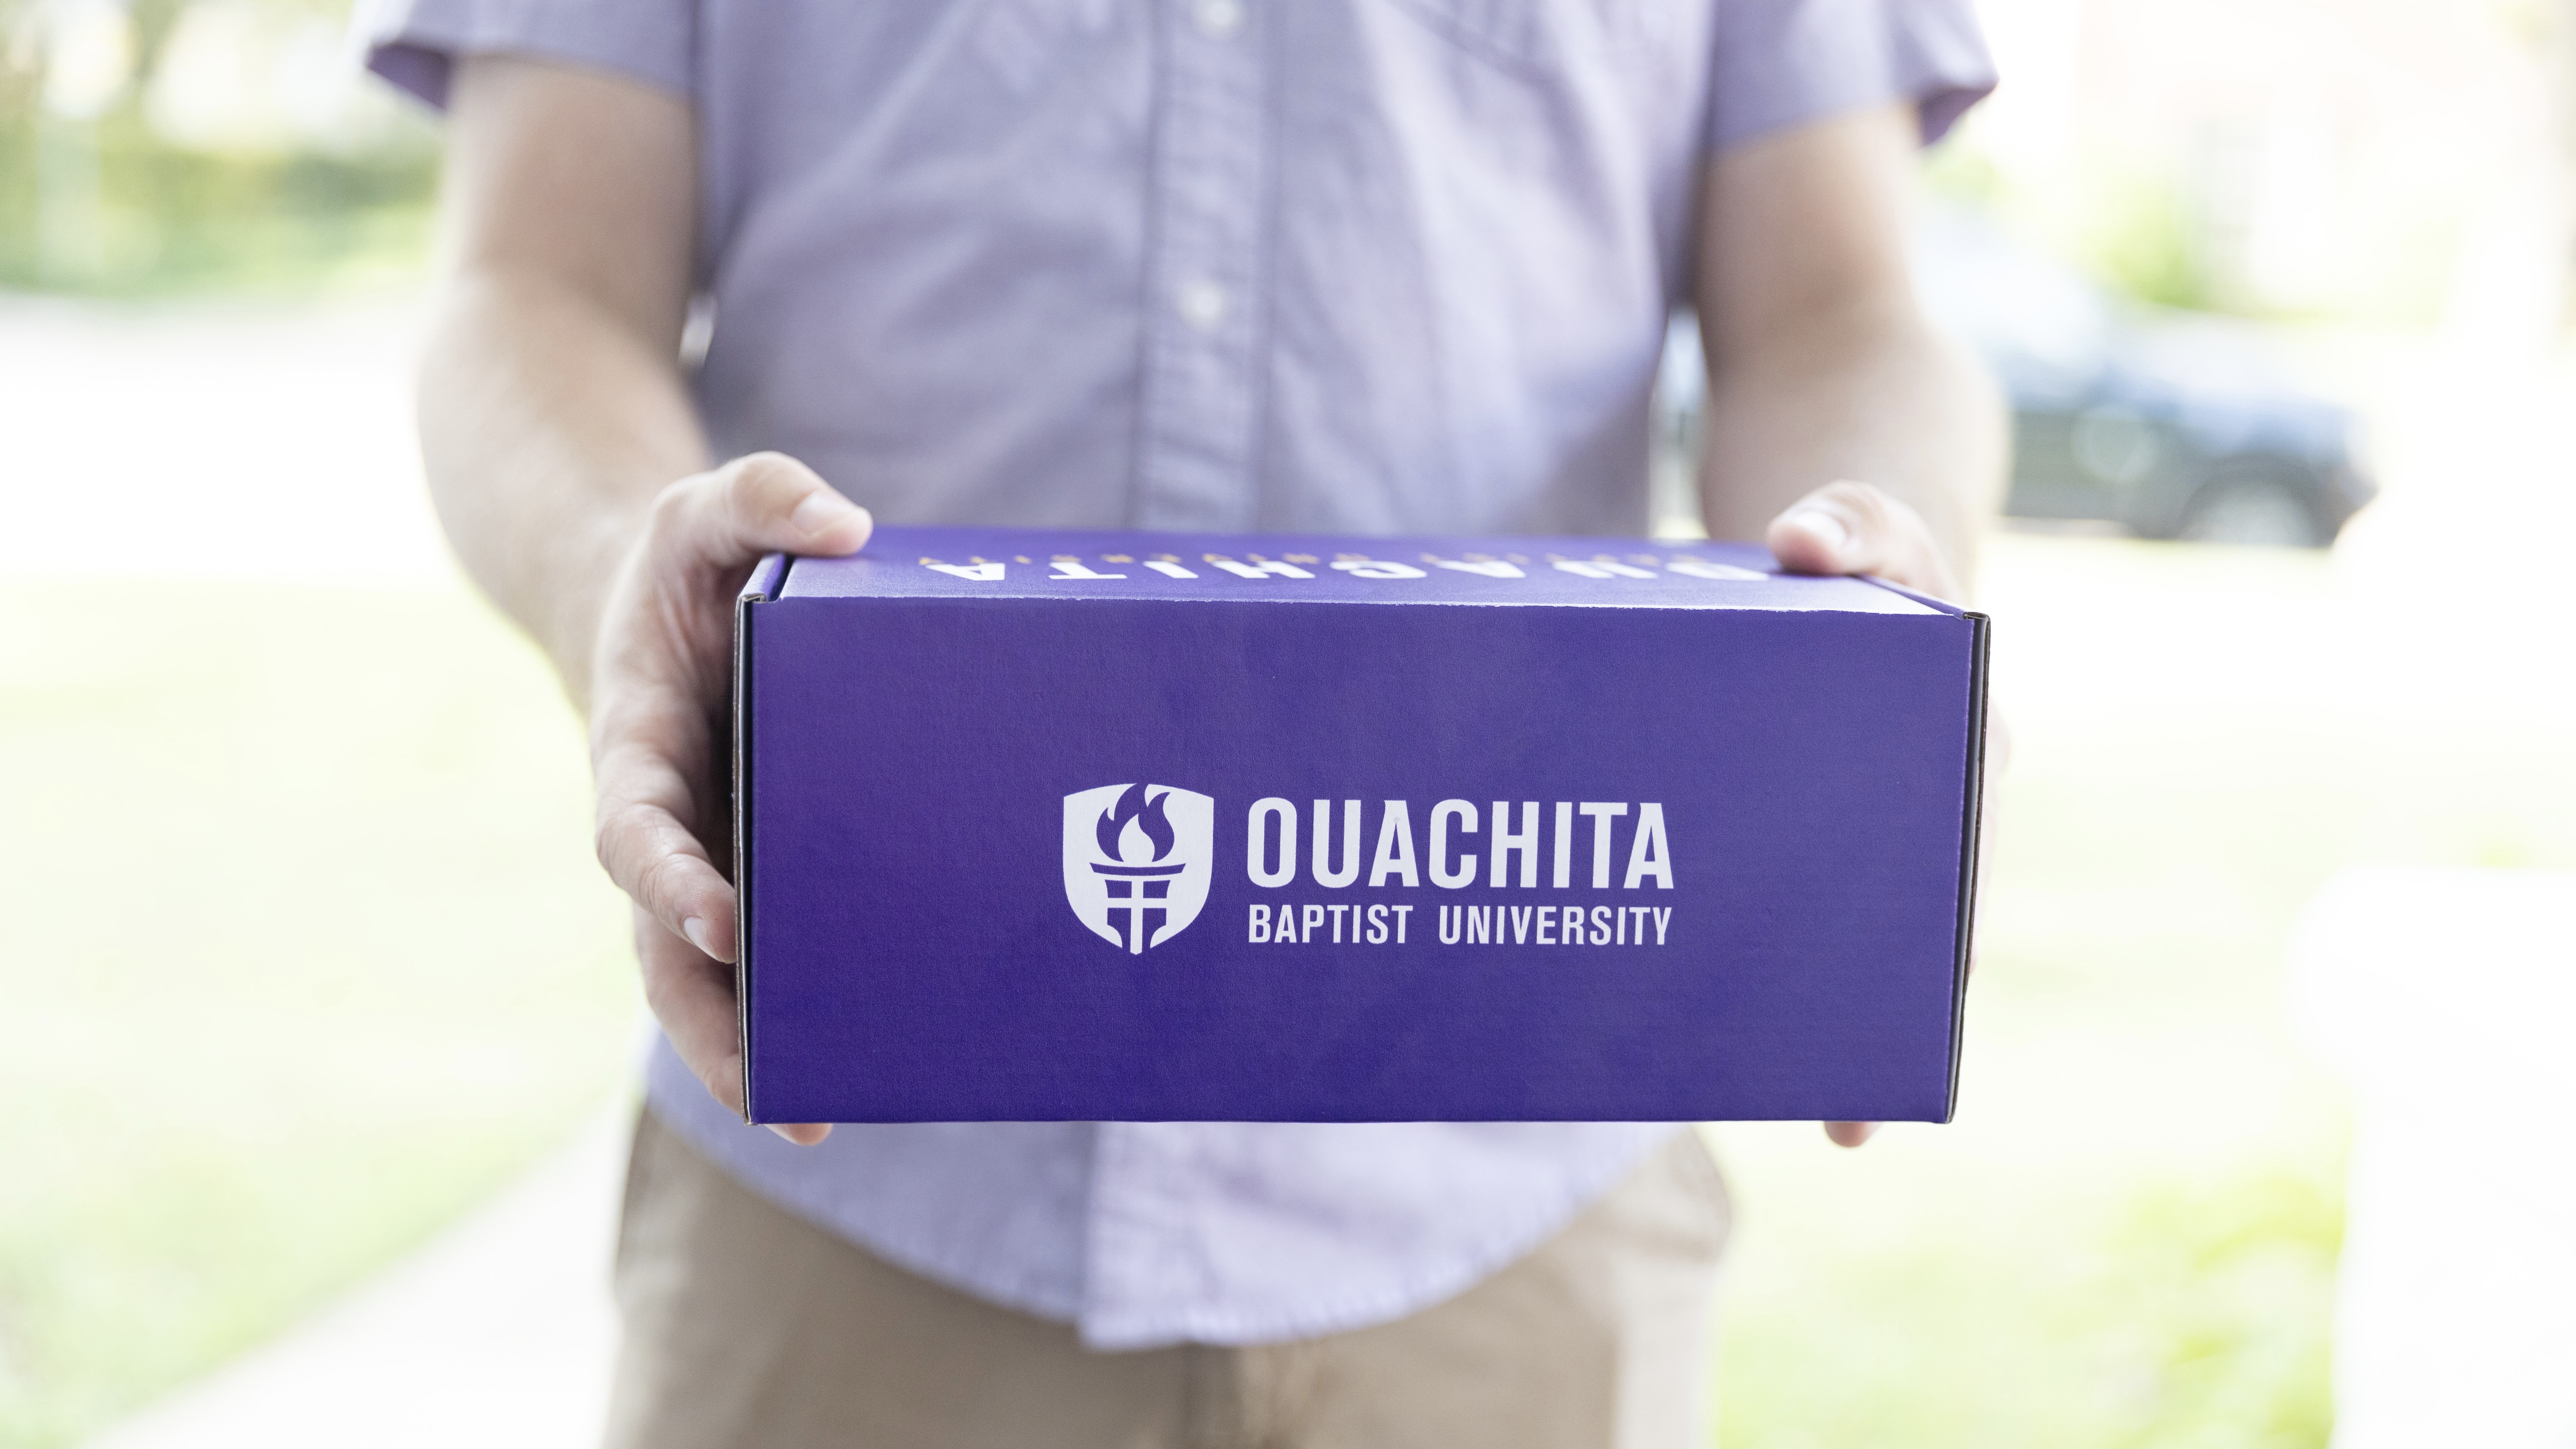 Admissions acceptance box from Ouachita Baptist University